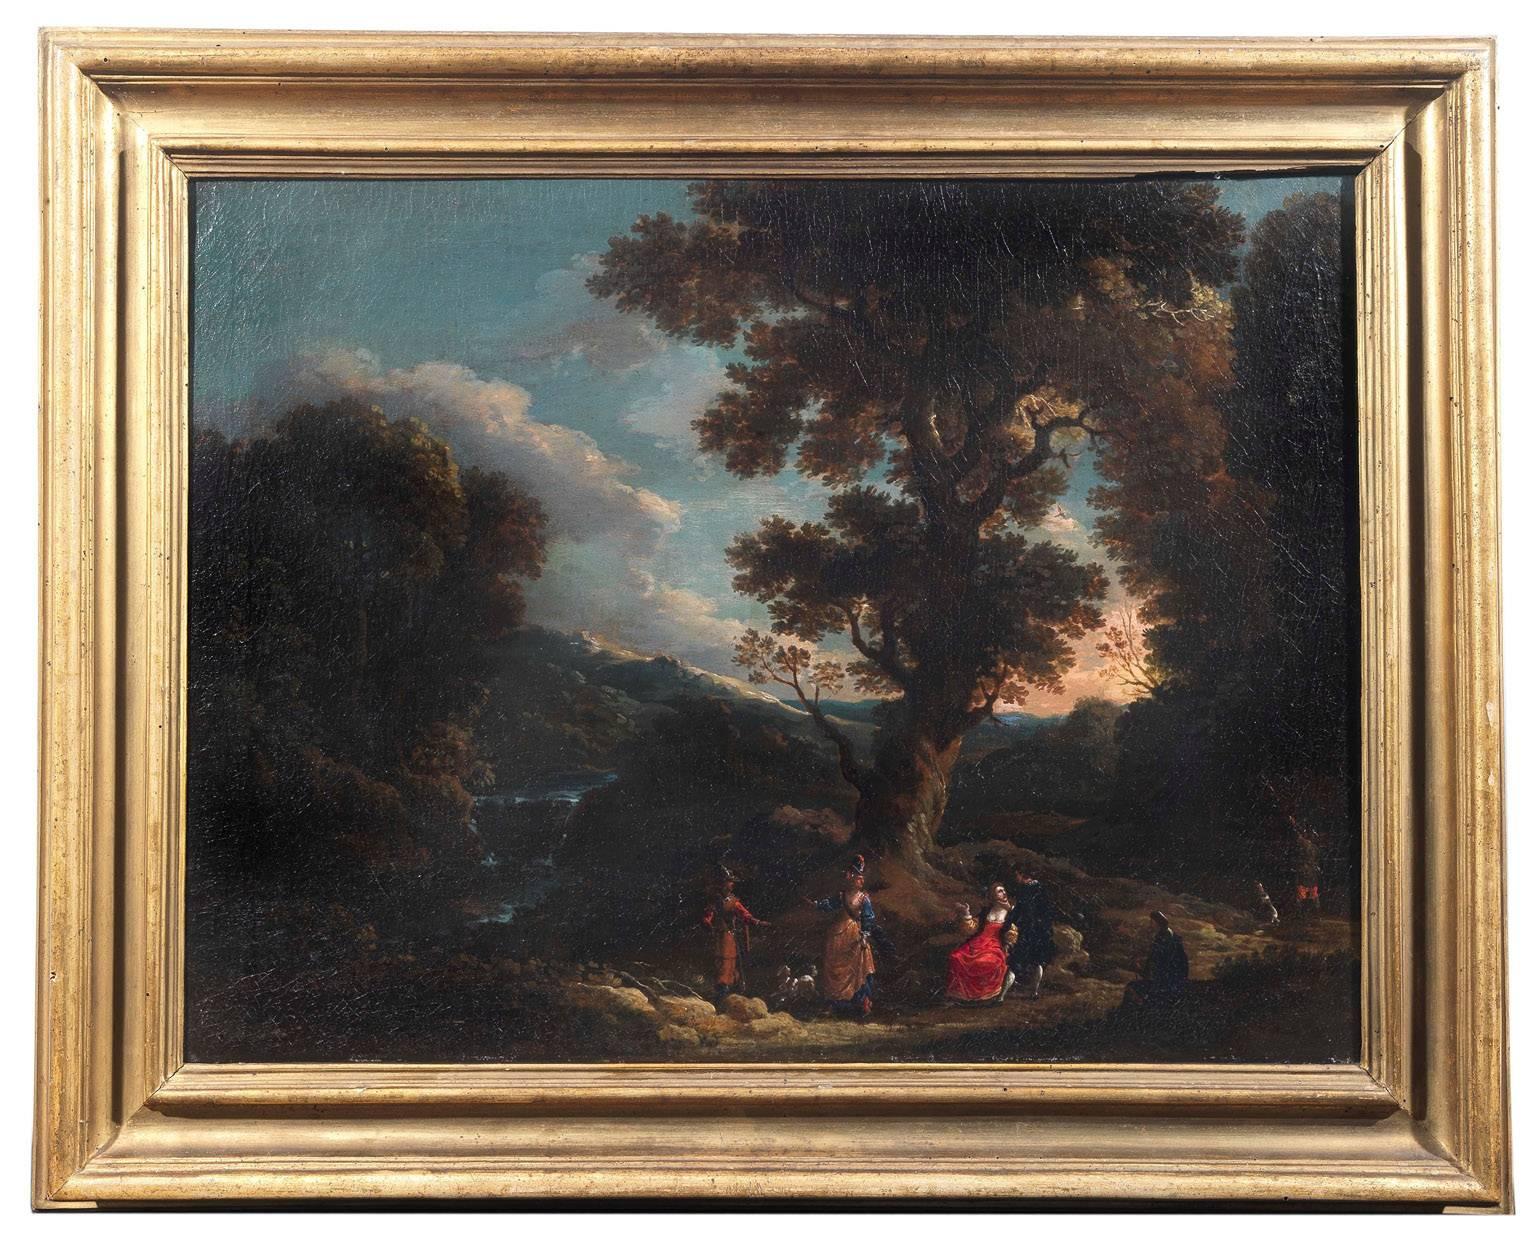 Landscape with hunting scene - Painting by Filippo Napoletano